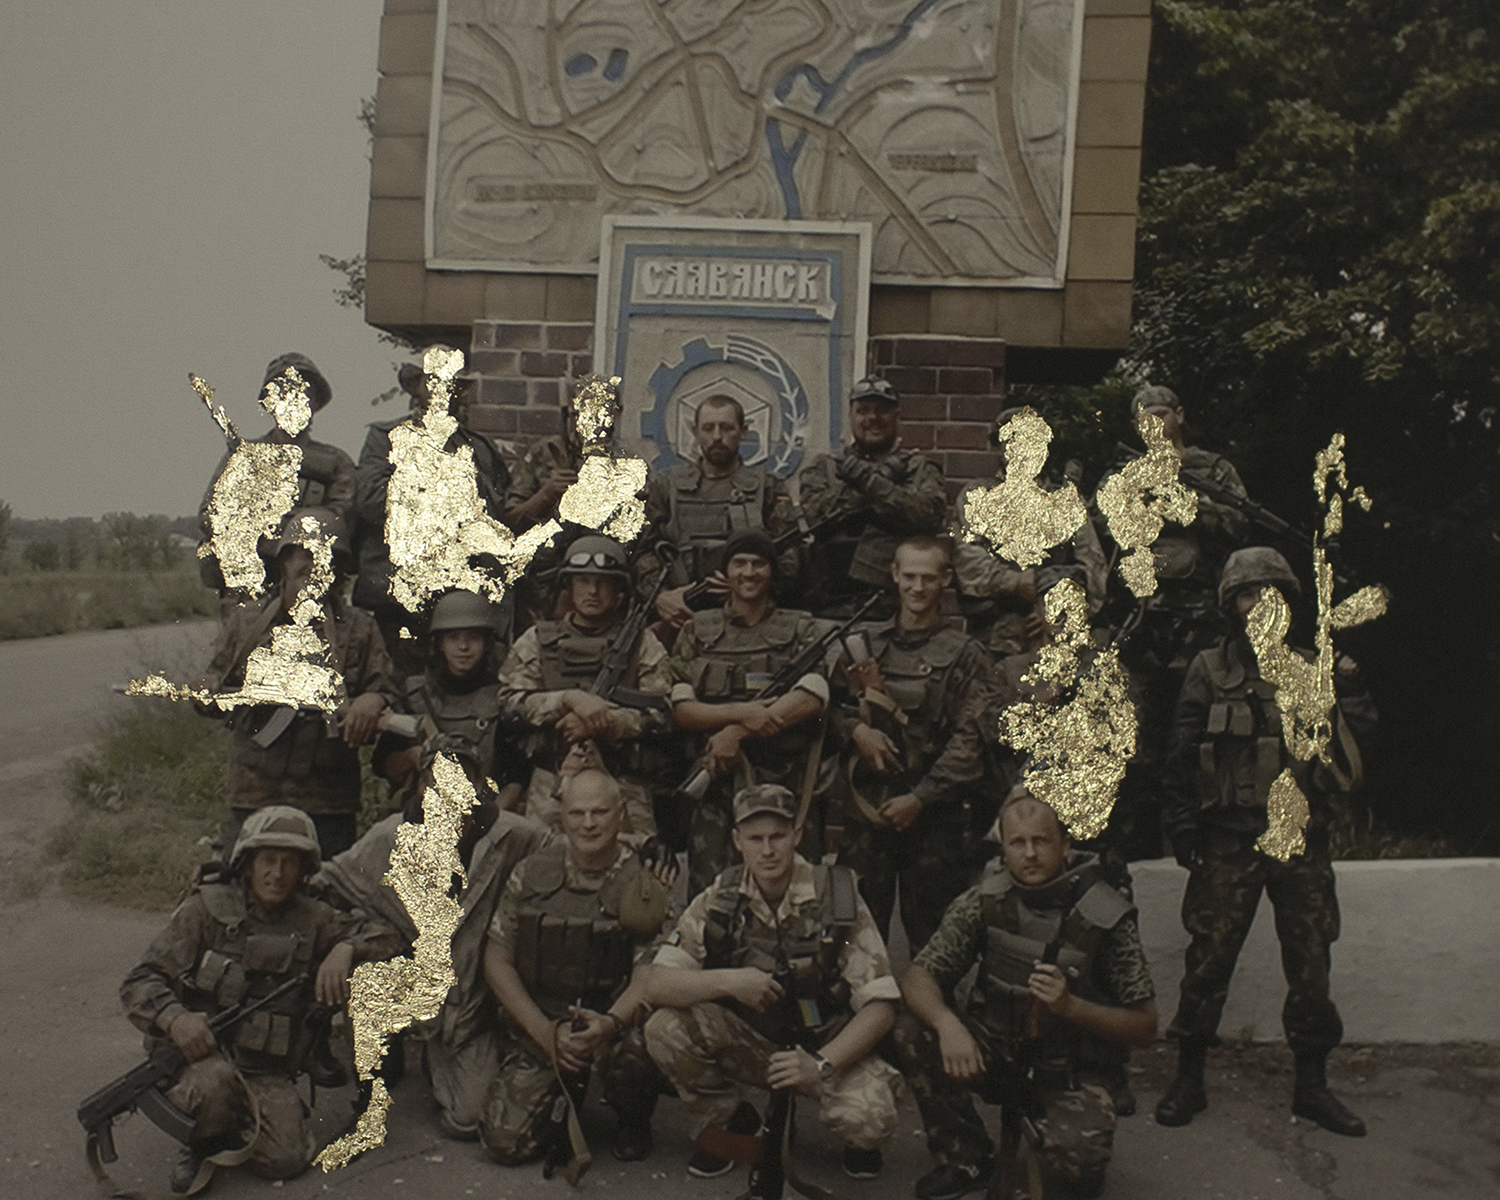 From the series “Sparks”: "The squad of nine killed and eight wounded (1)", from the Golden Collages series, based on a picture from soldier’s mobile phone, 2015-2016, inkjet print and gold leaves, 90x112 cm